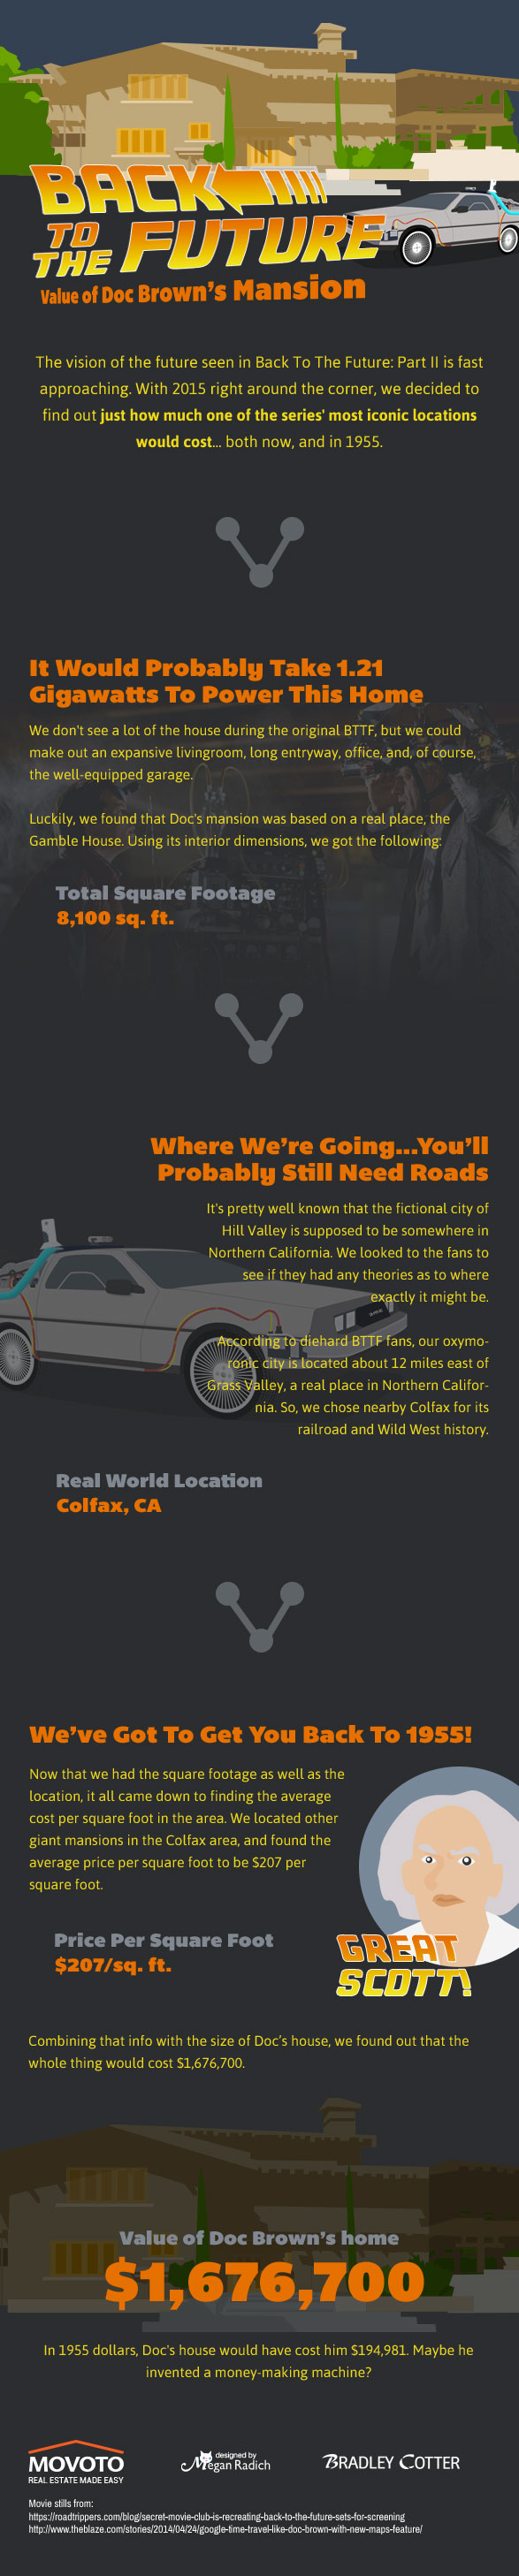 back-to-the-future-infographic